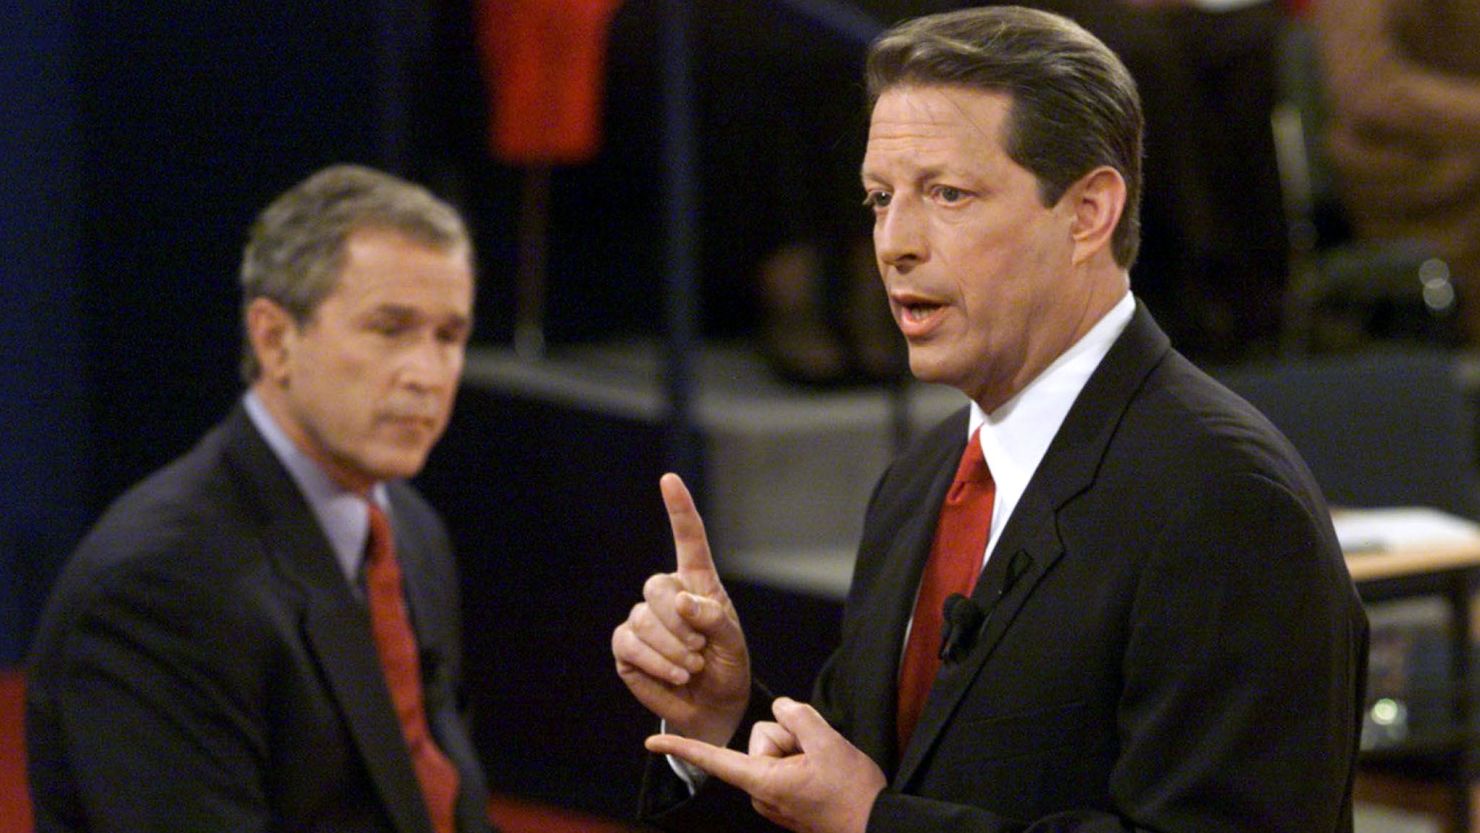 ST. LOUIS:  Democratic presidential nominee Al Gore answers a question as Republican presidential nominee George W. Bush listens during their third debate at Washington University on October 17, 2000. 